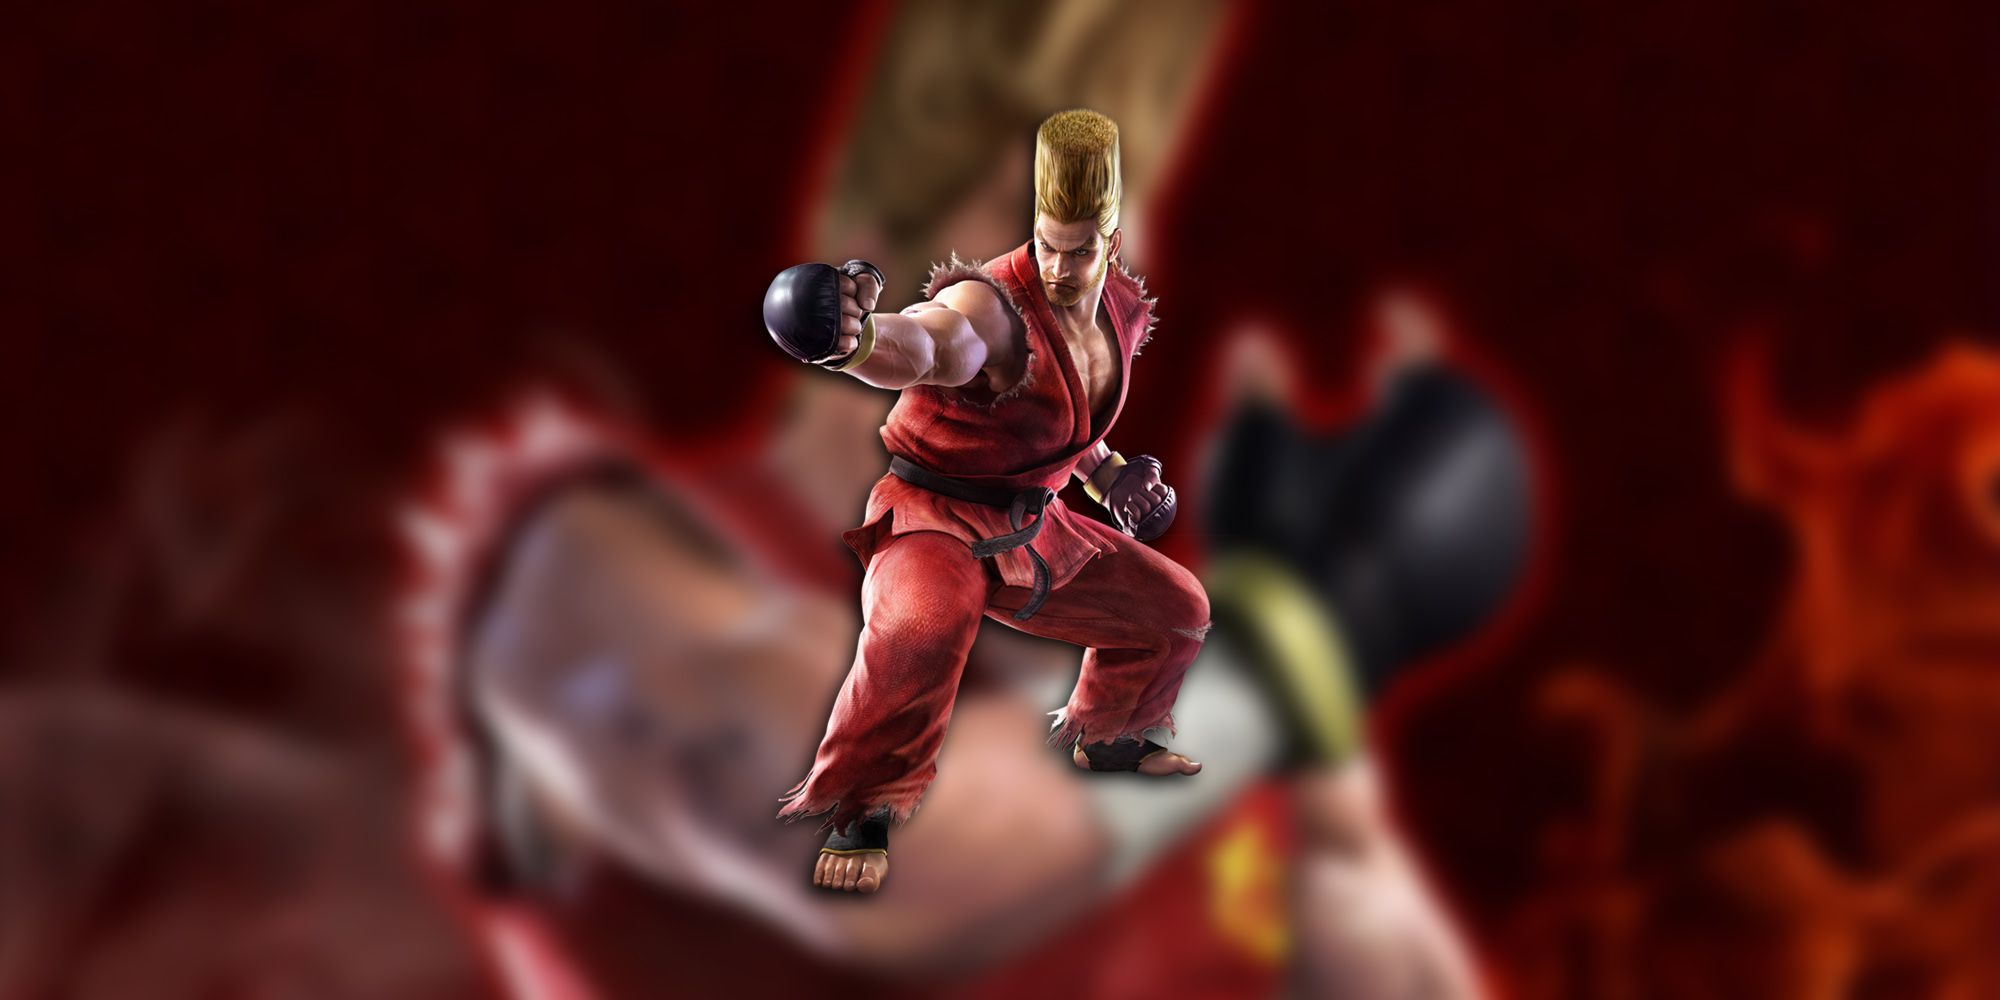 Paul Phoenix From Tekken PNG Overlaid On Image Of Him In-Game